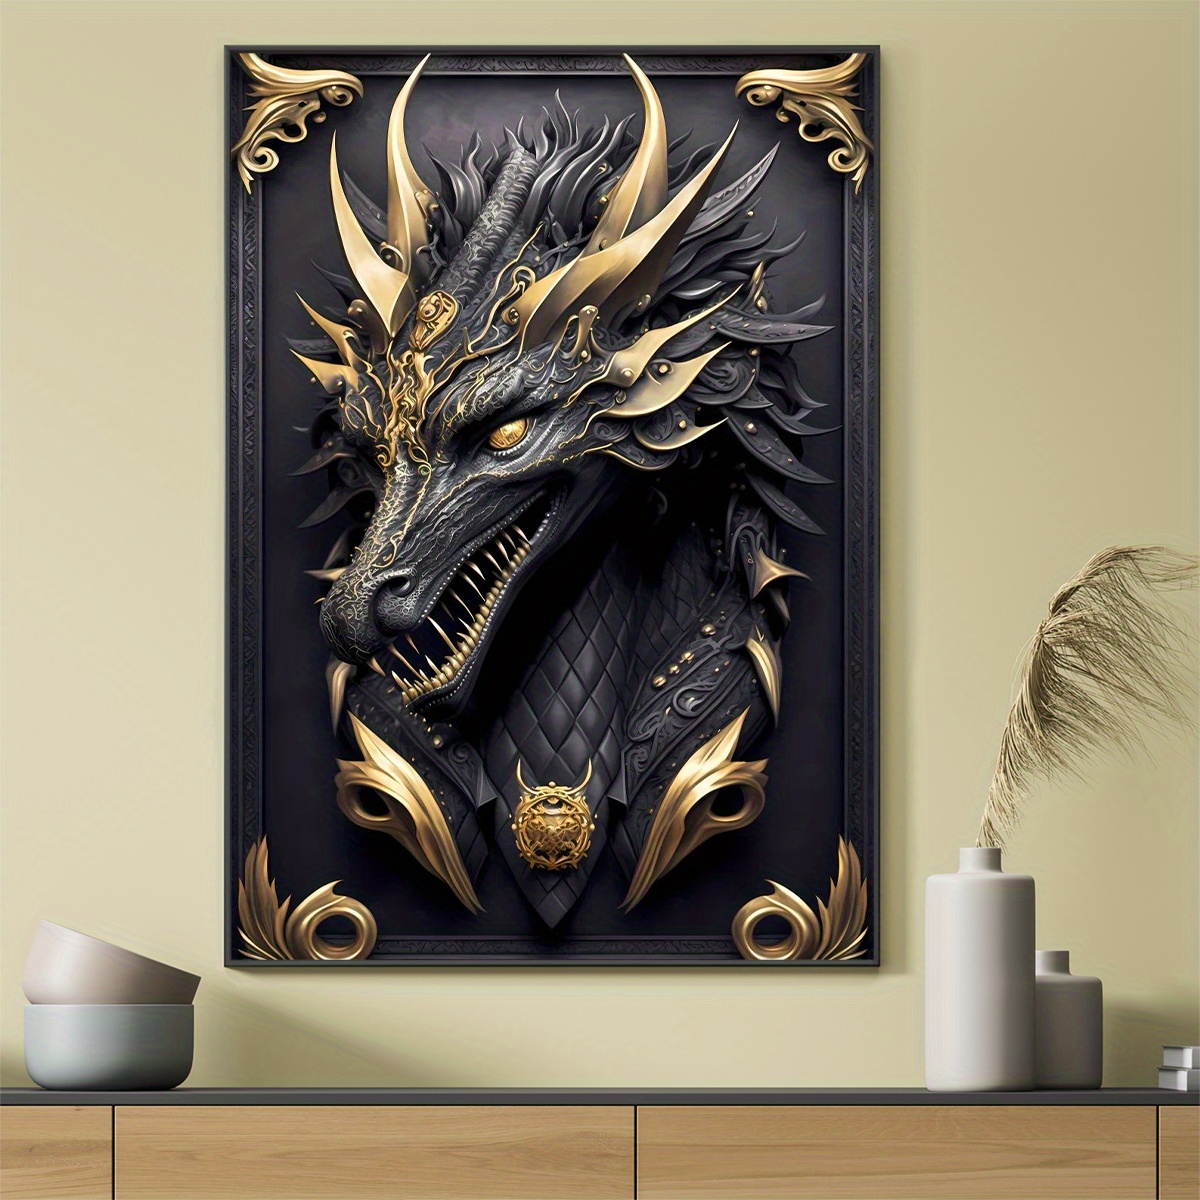 

1pc Wall Art For Home Decor, Dragon Lovers Poster Wall Decor Cool Canvas Prints For Living Room Bedroom Kitchen Office Cafe Decor Eid Al-adha Mubarak